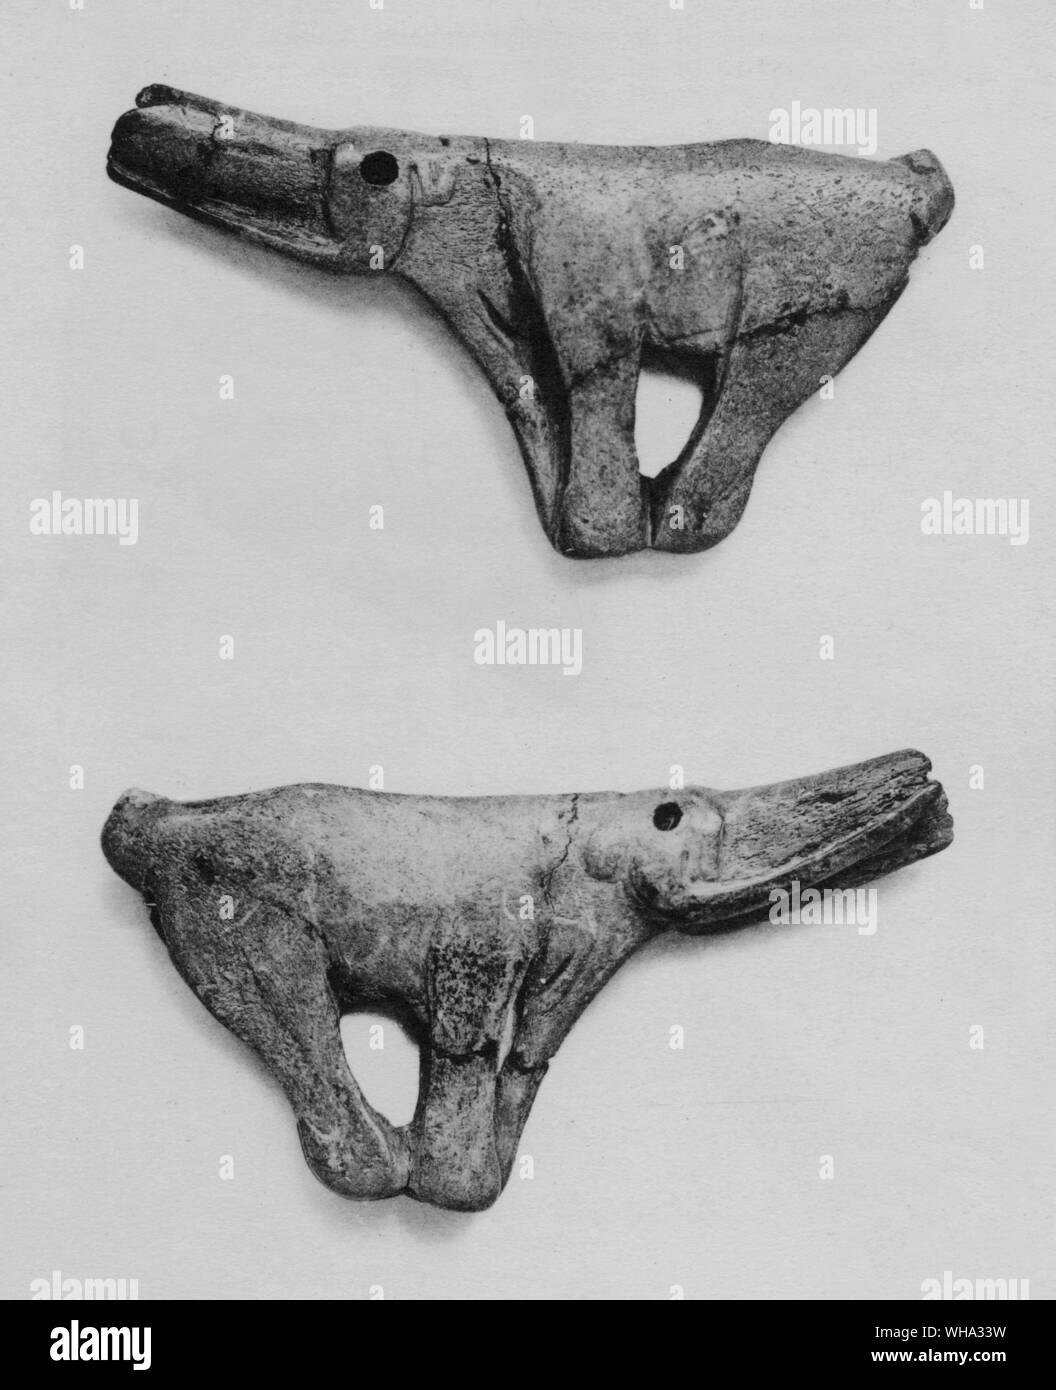 Early man: Carving. Top: dagger handle of reindeer antler, carved in form of a mammoth; Monastruc, Bruniquel, S. France; La Madeleine period. Stock Photo